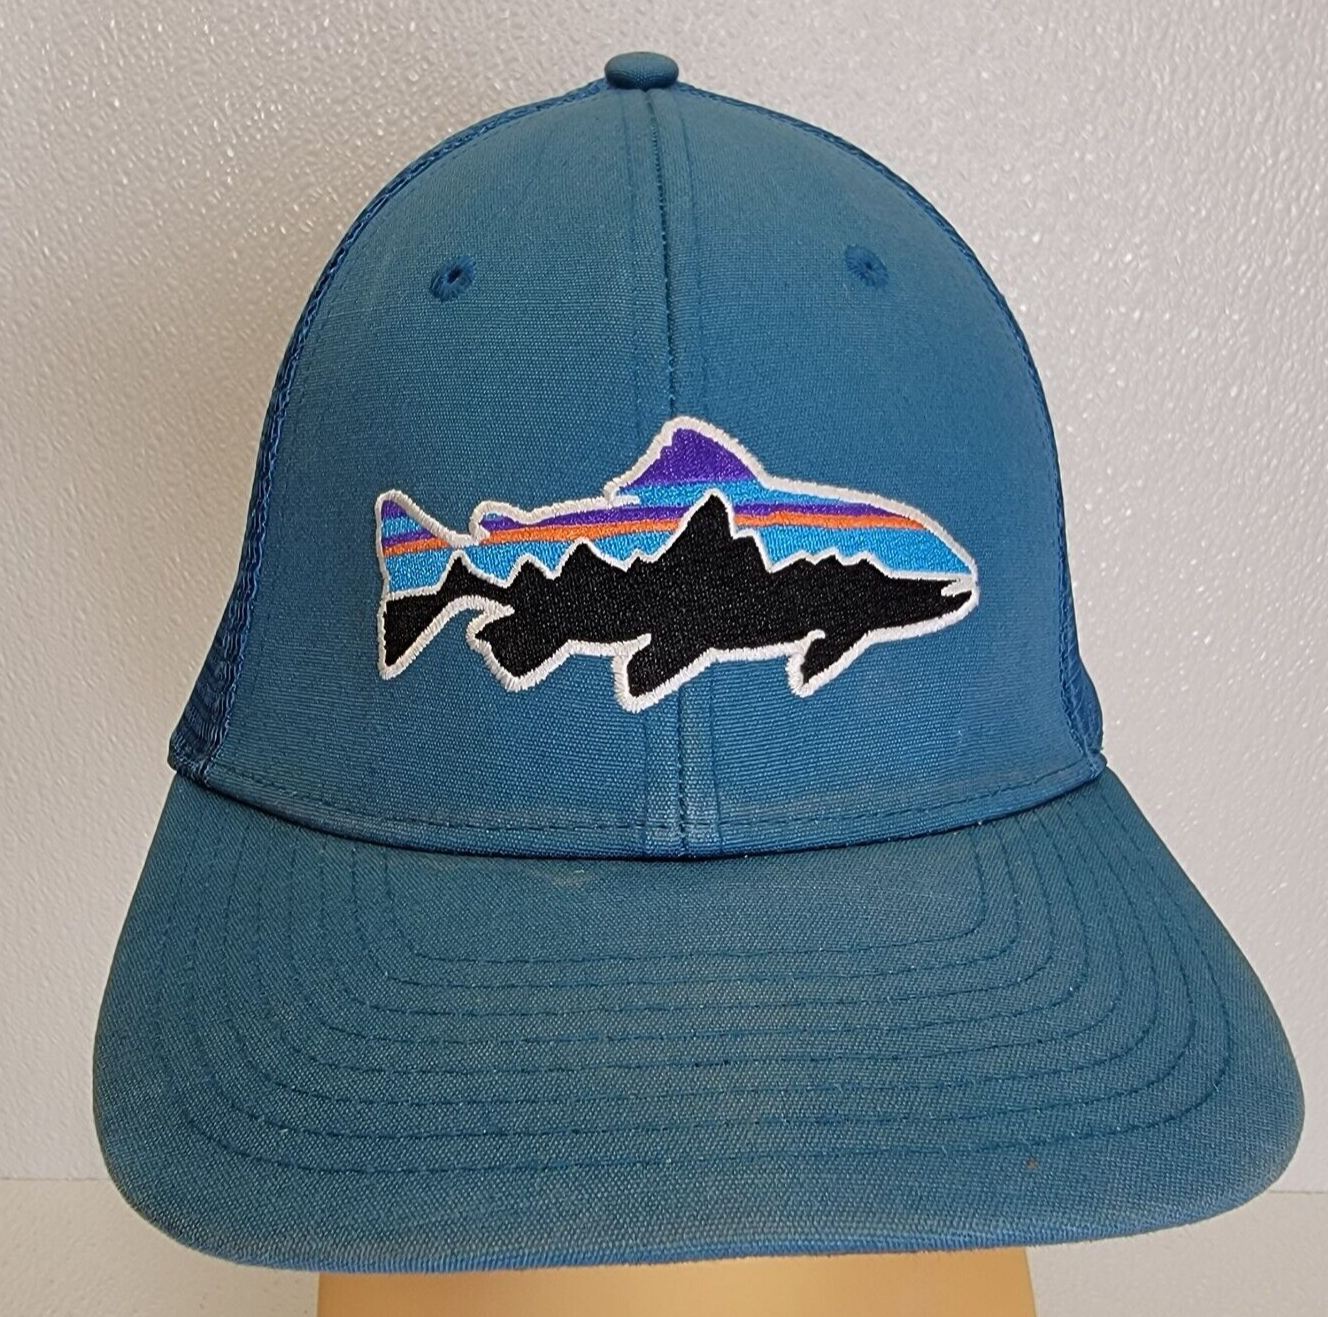 Primary image for Patagonia Trout Fish Mesh Trucker Hat Snapback Blue Cap Adjustable - Read